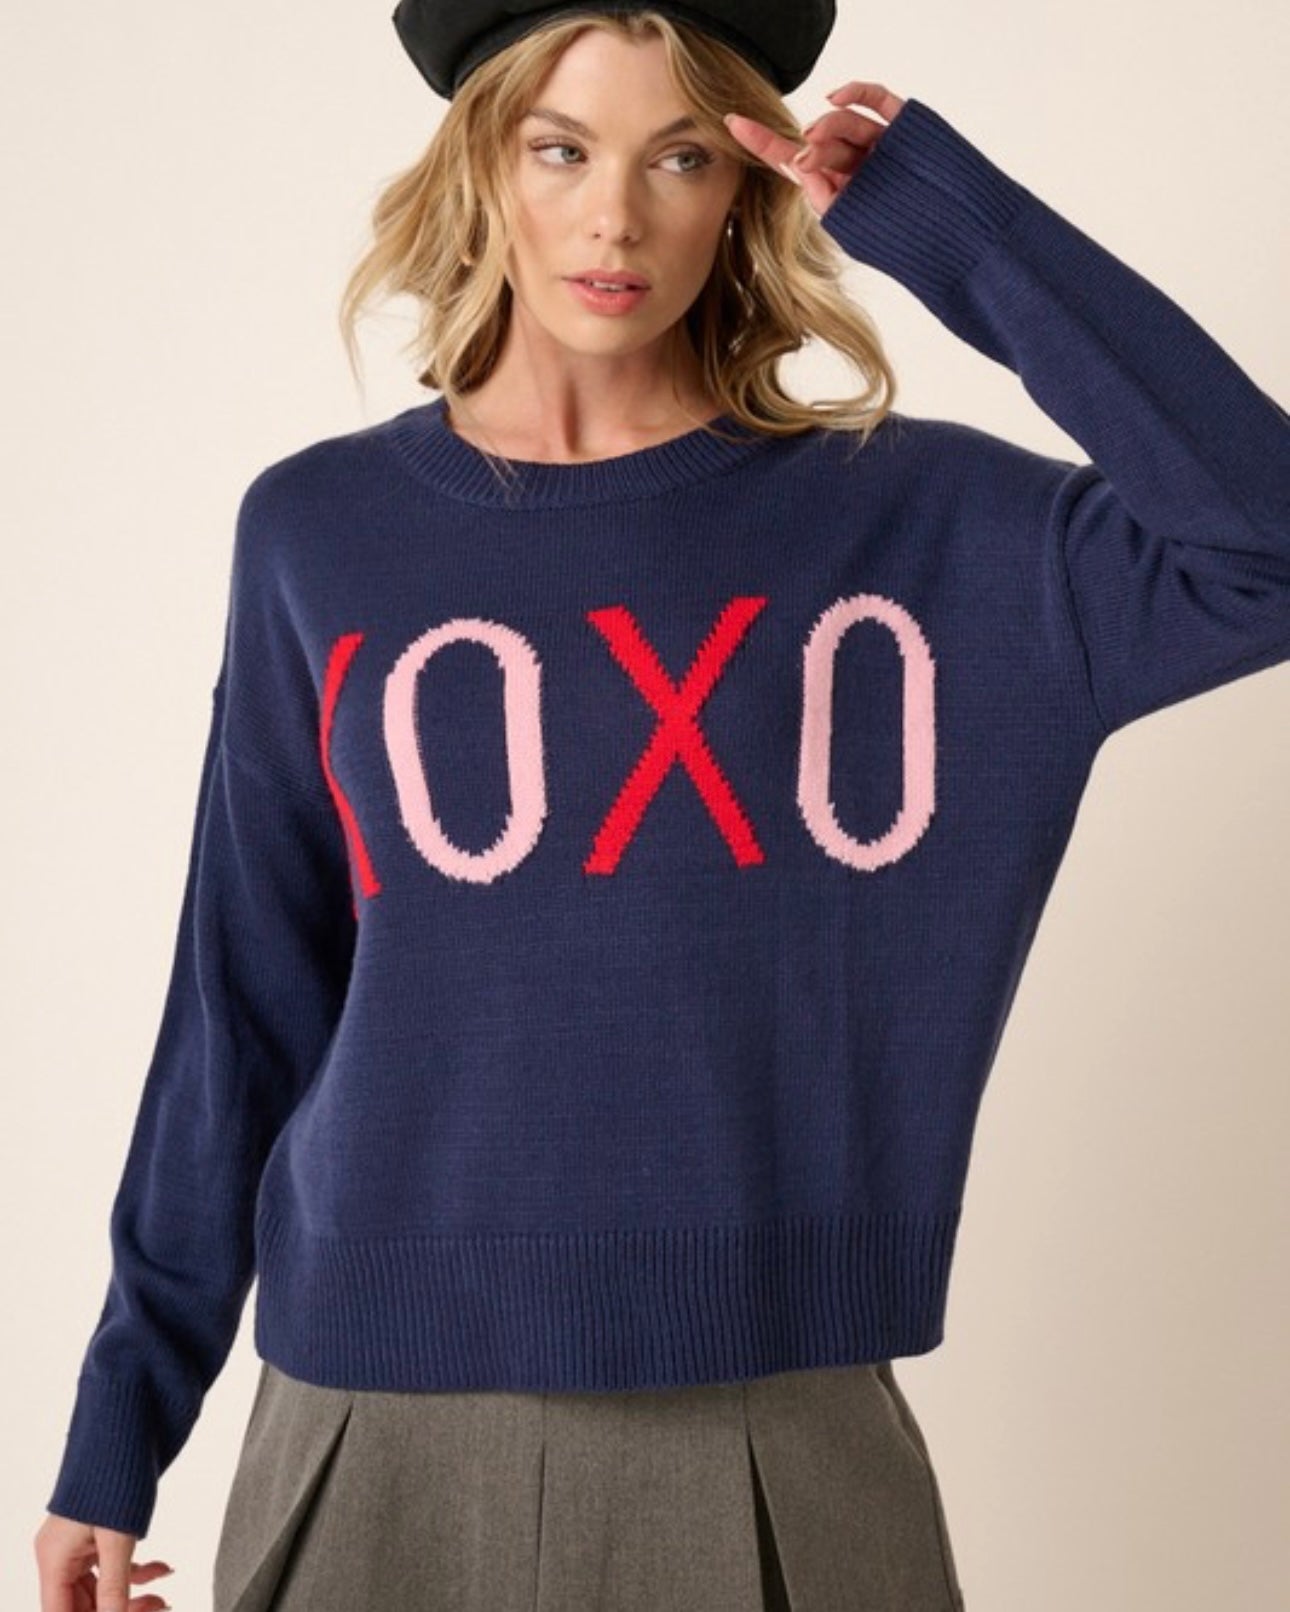 XOXO Letter Sweater